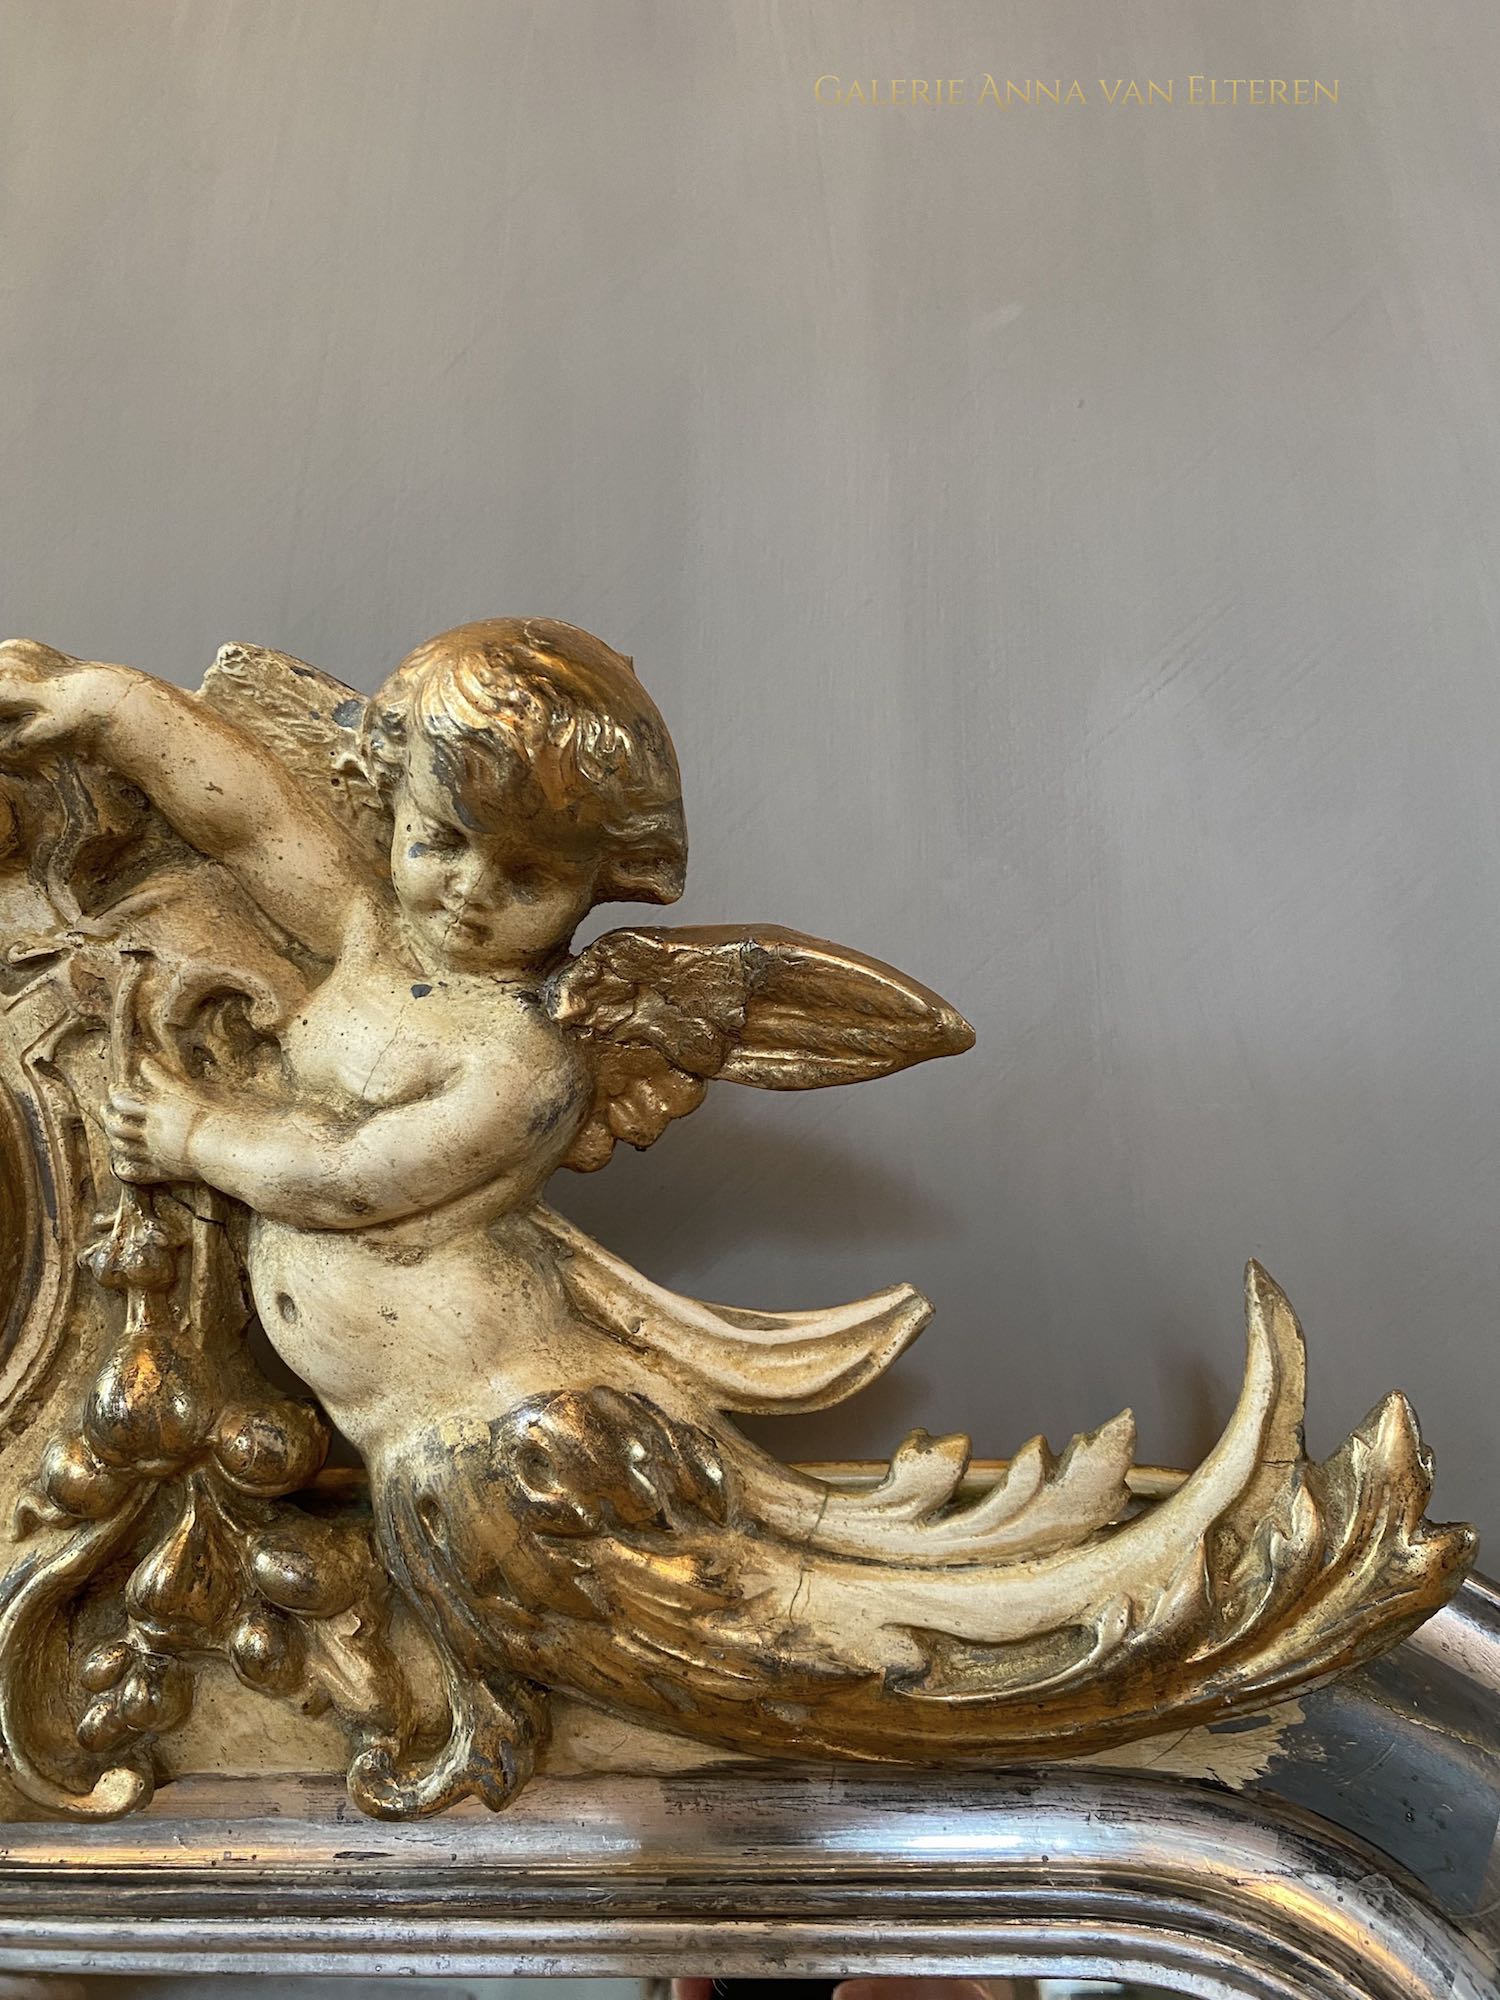 19th c. French mirror with cherubs